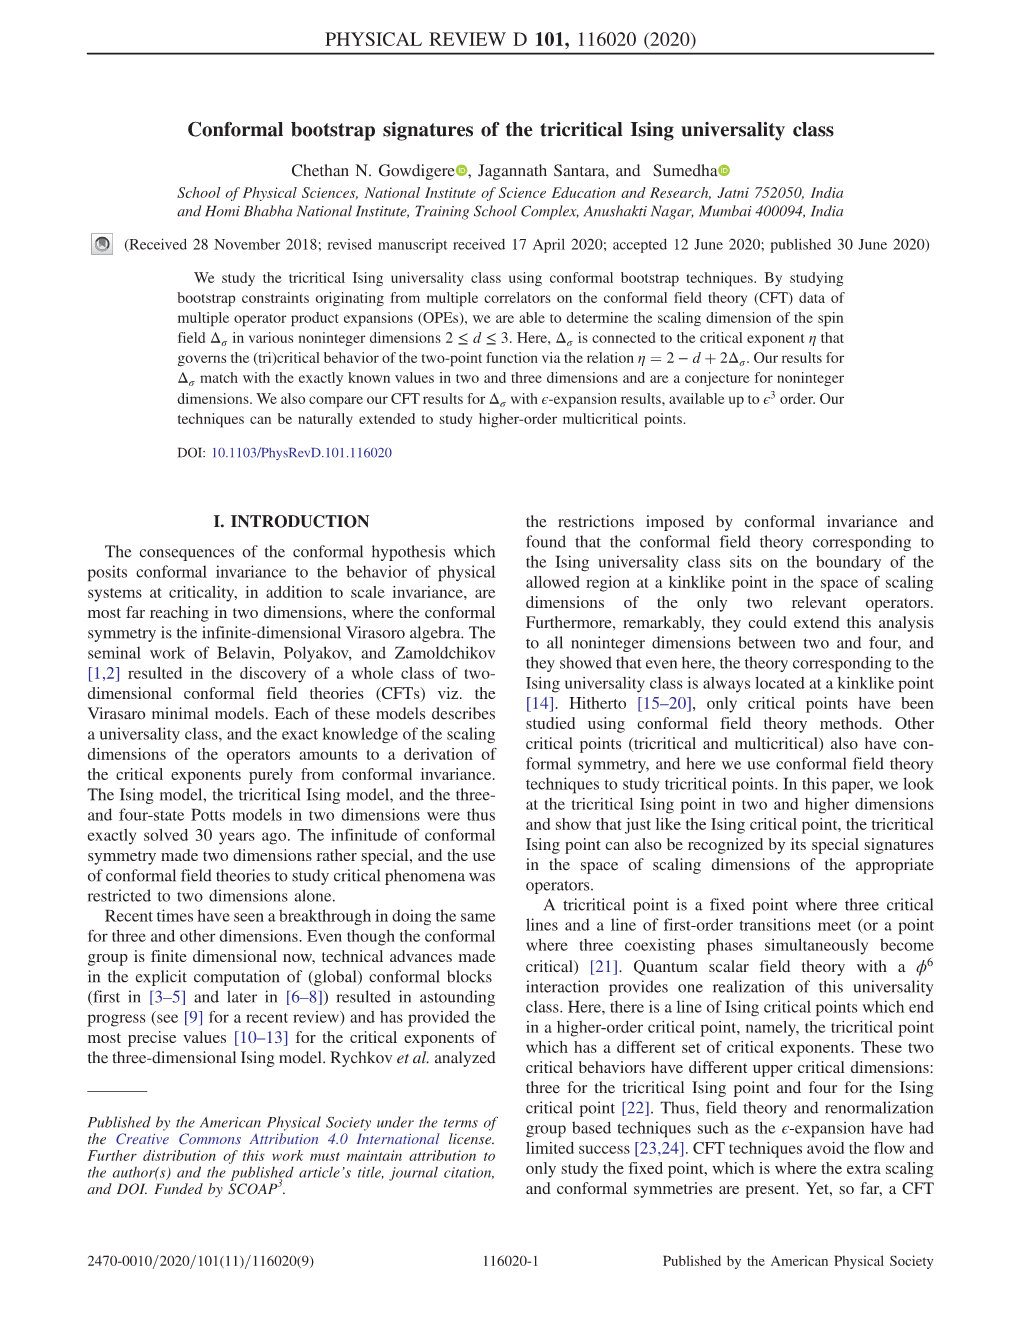 Conformal Bootstrap Signatures of the Tricritical Ising Universality Class